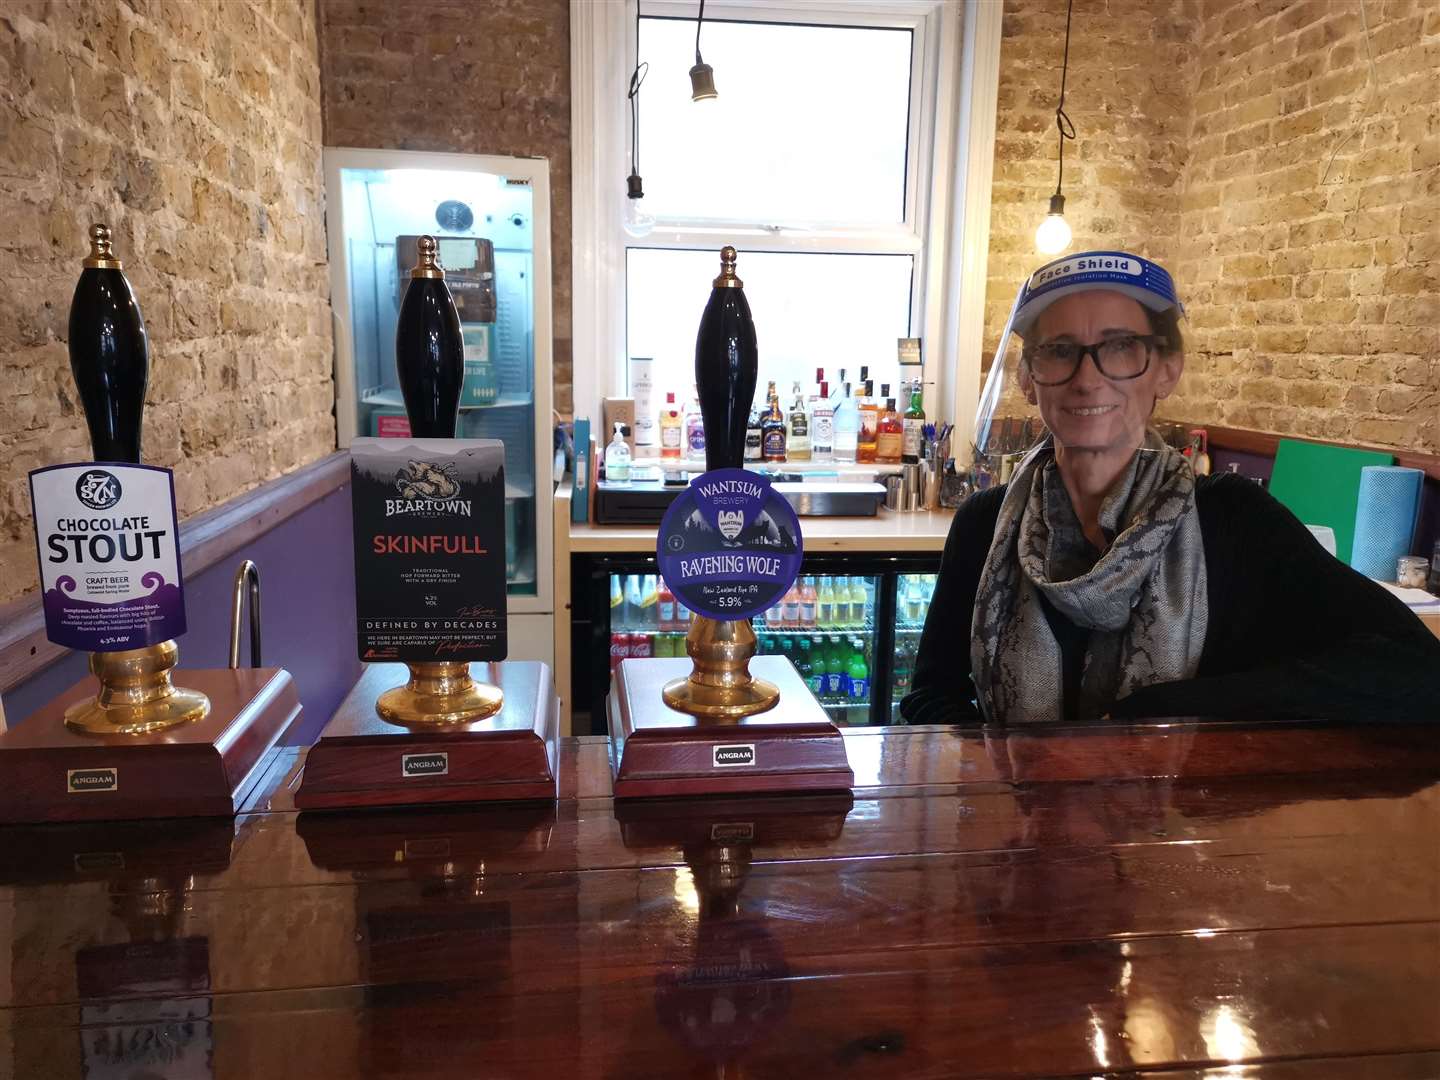 Nicola Werner has started running The Pub Ramsgate - but says she will only employ women